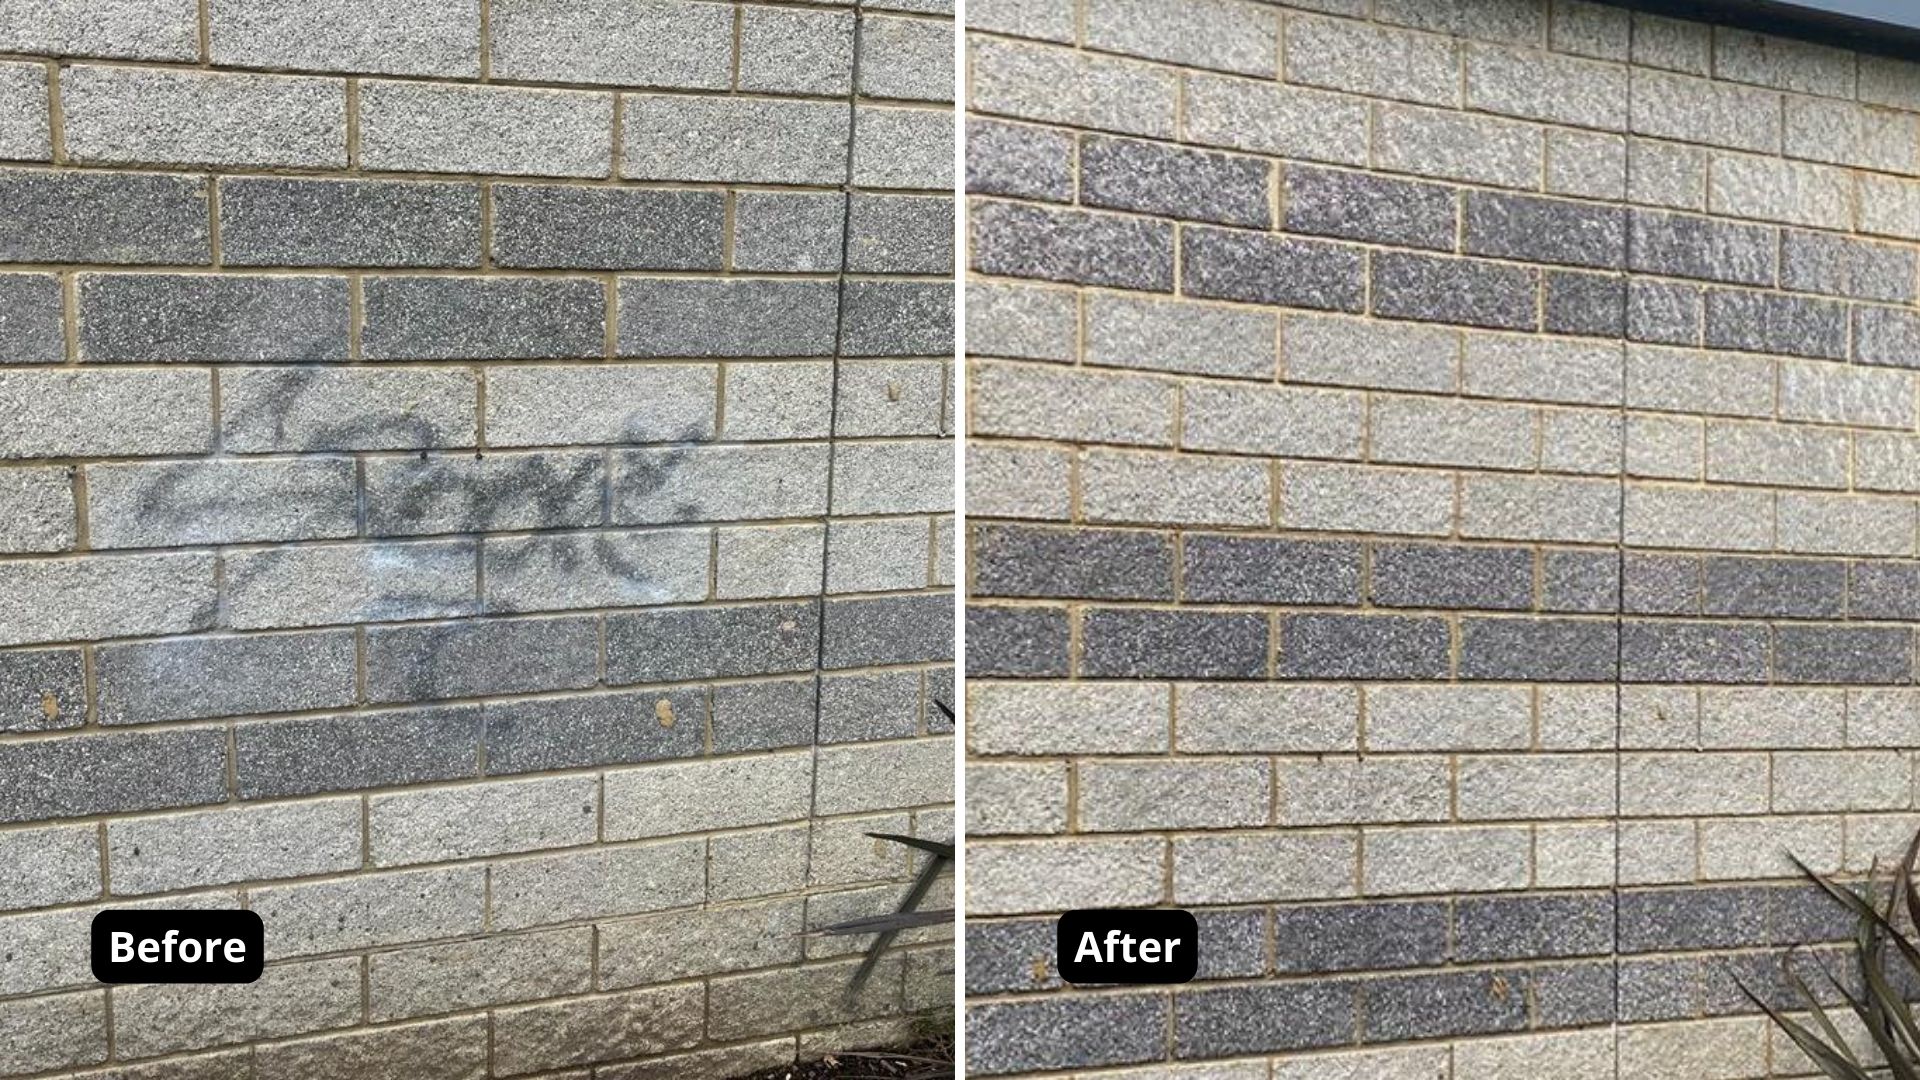 Before and after image of graffiti removed from a brick wall.